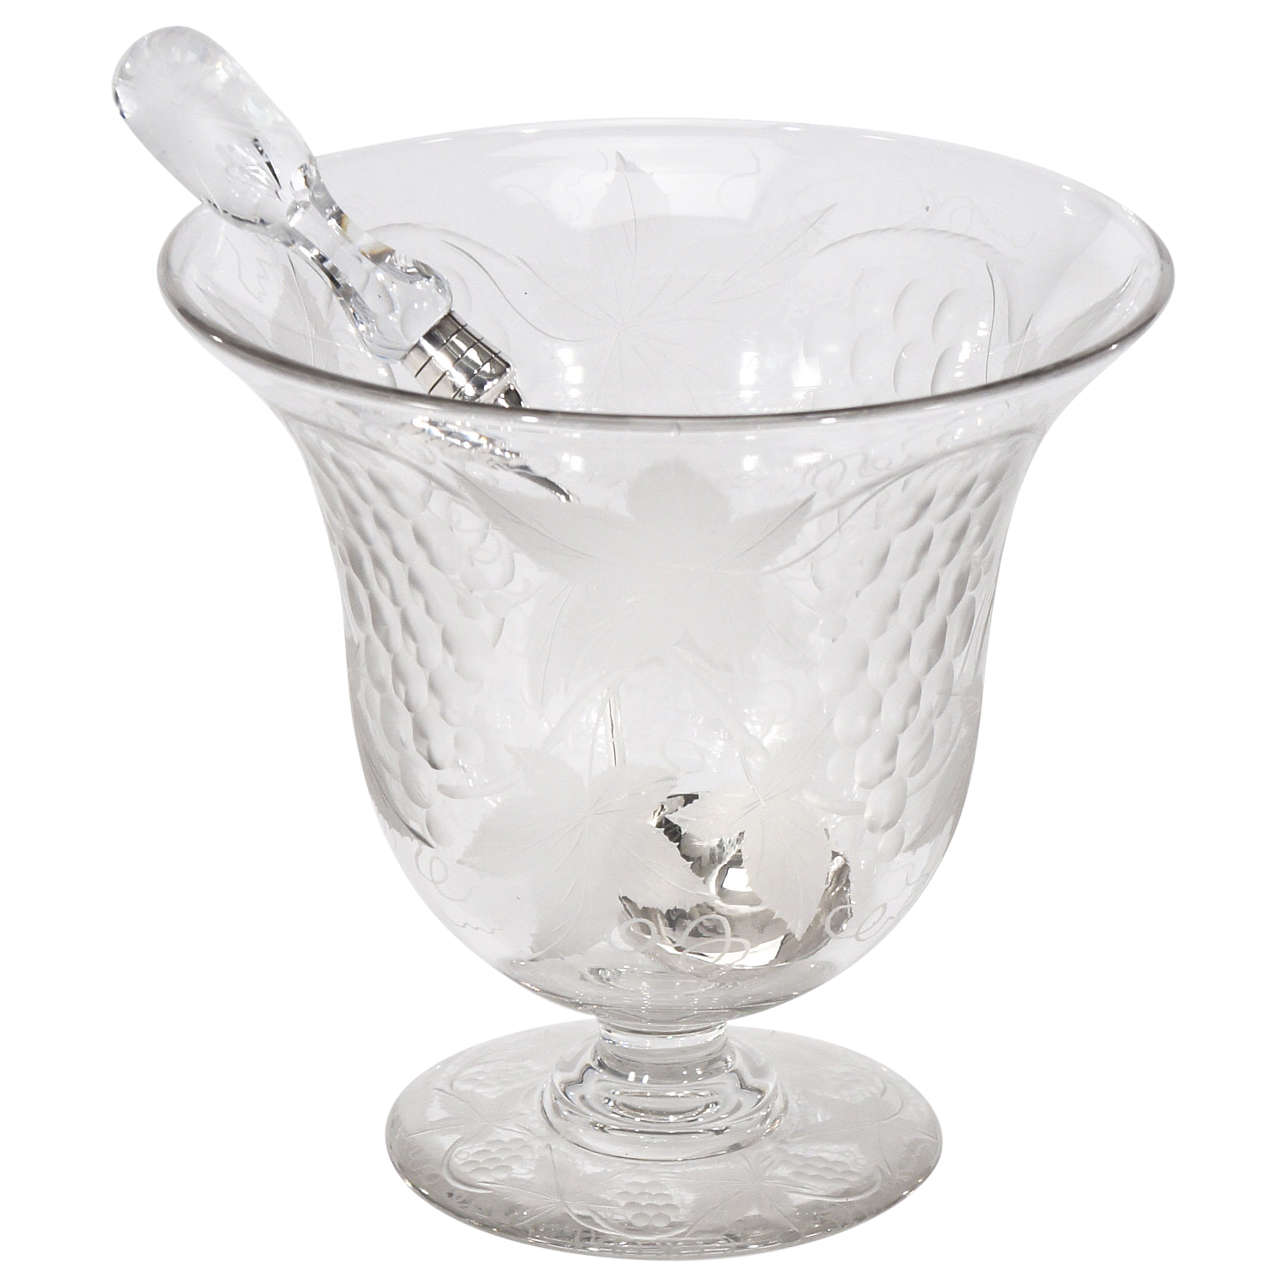 Rare Pairpoint Wheel Cut Crystal Punchbowl with Matching Signed Ladle For Sale